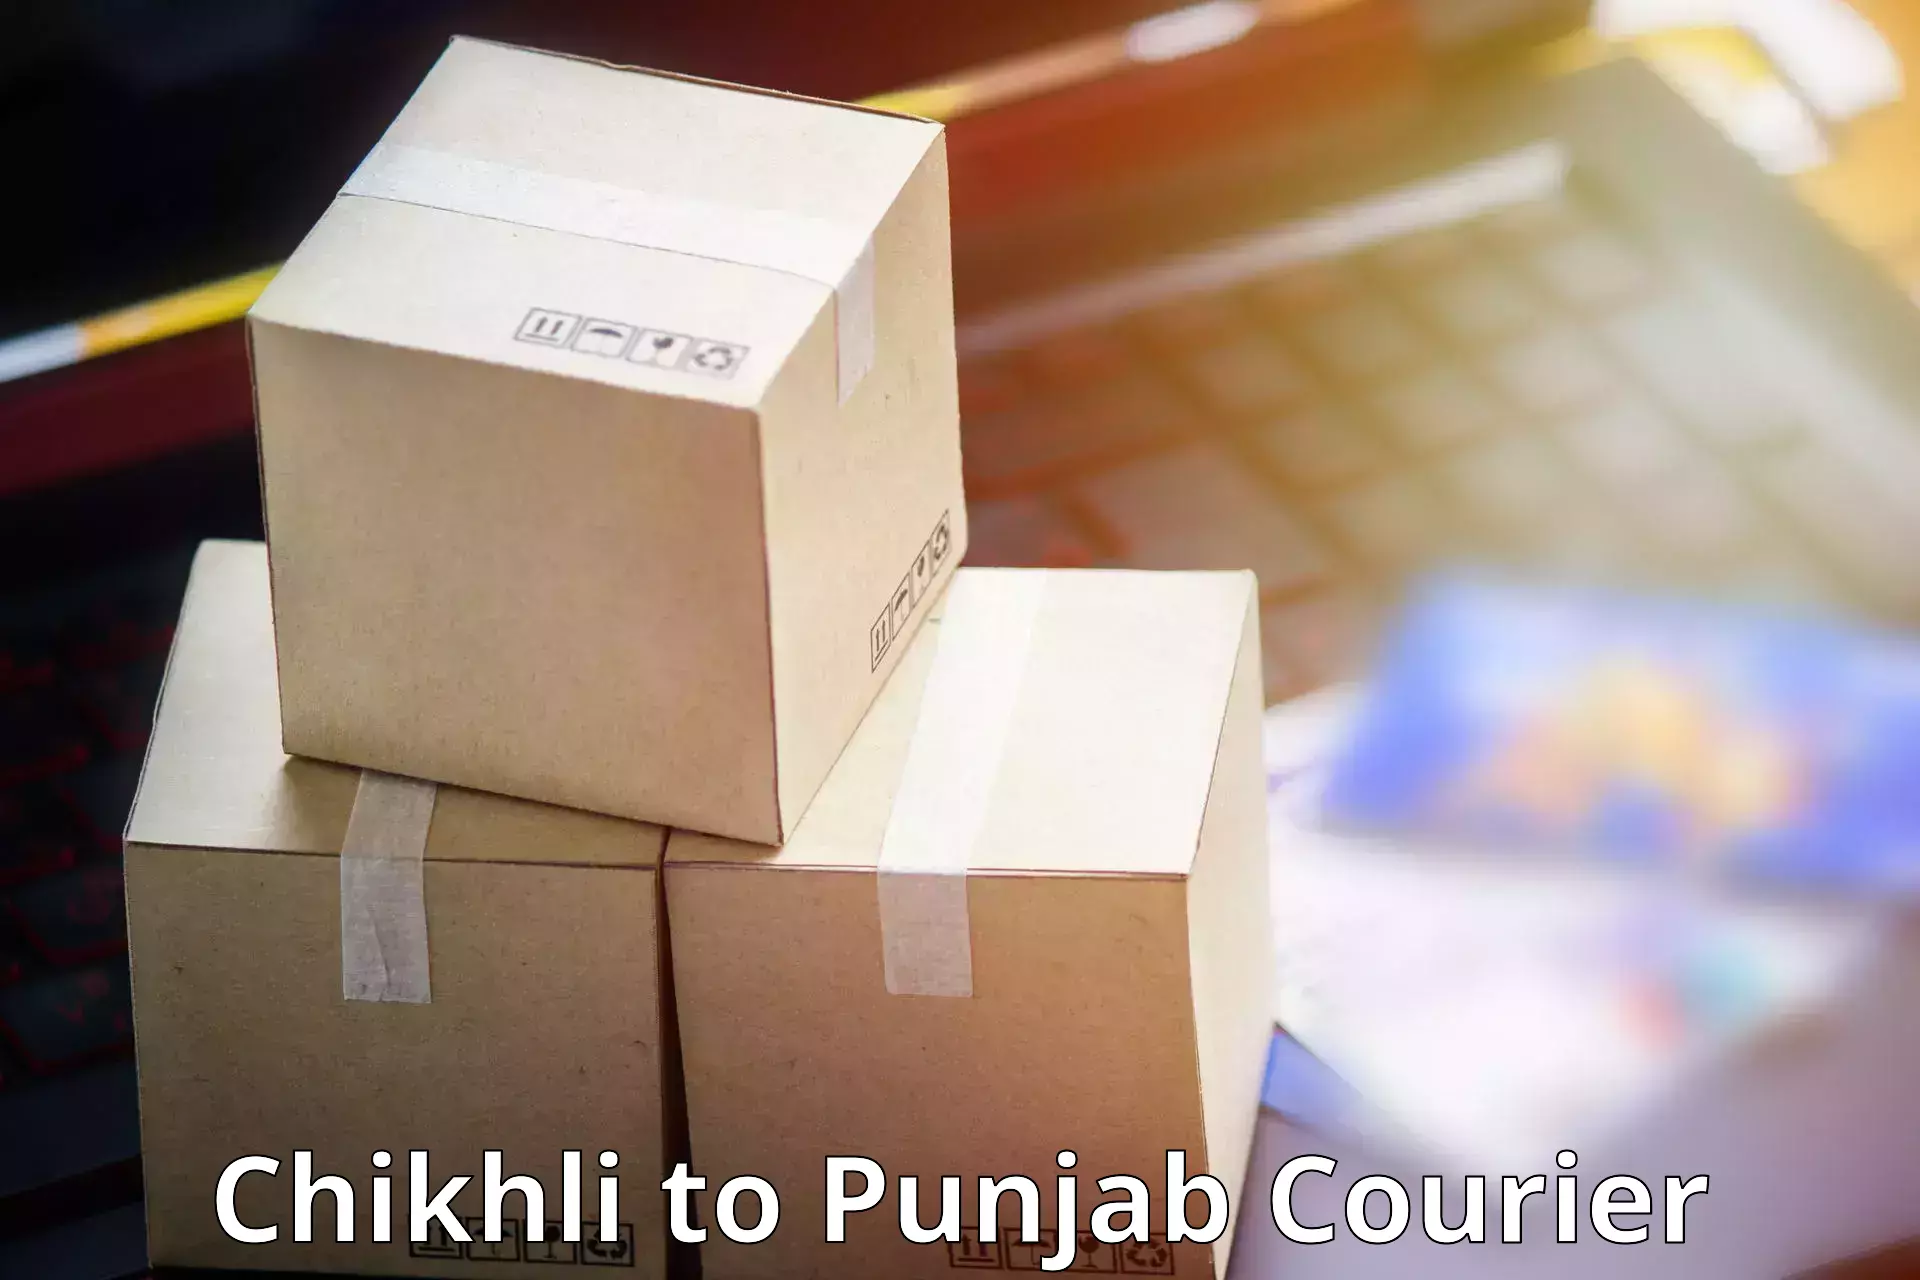 Express courier capabilities in Chikhli to Fatehgarh Sahib